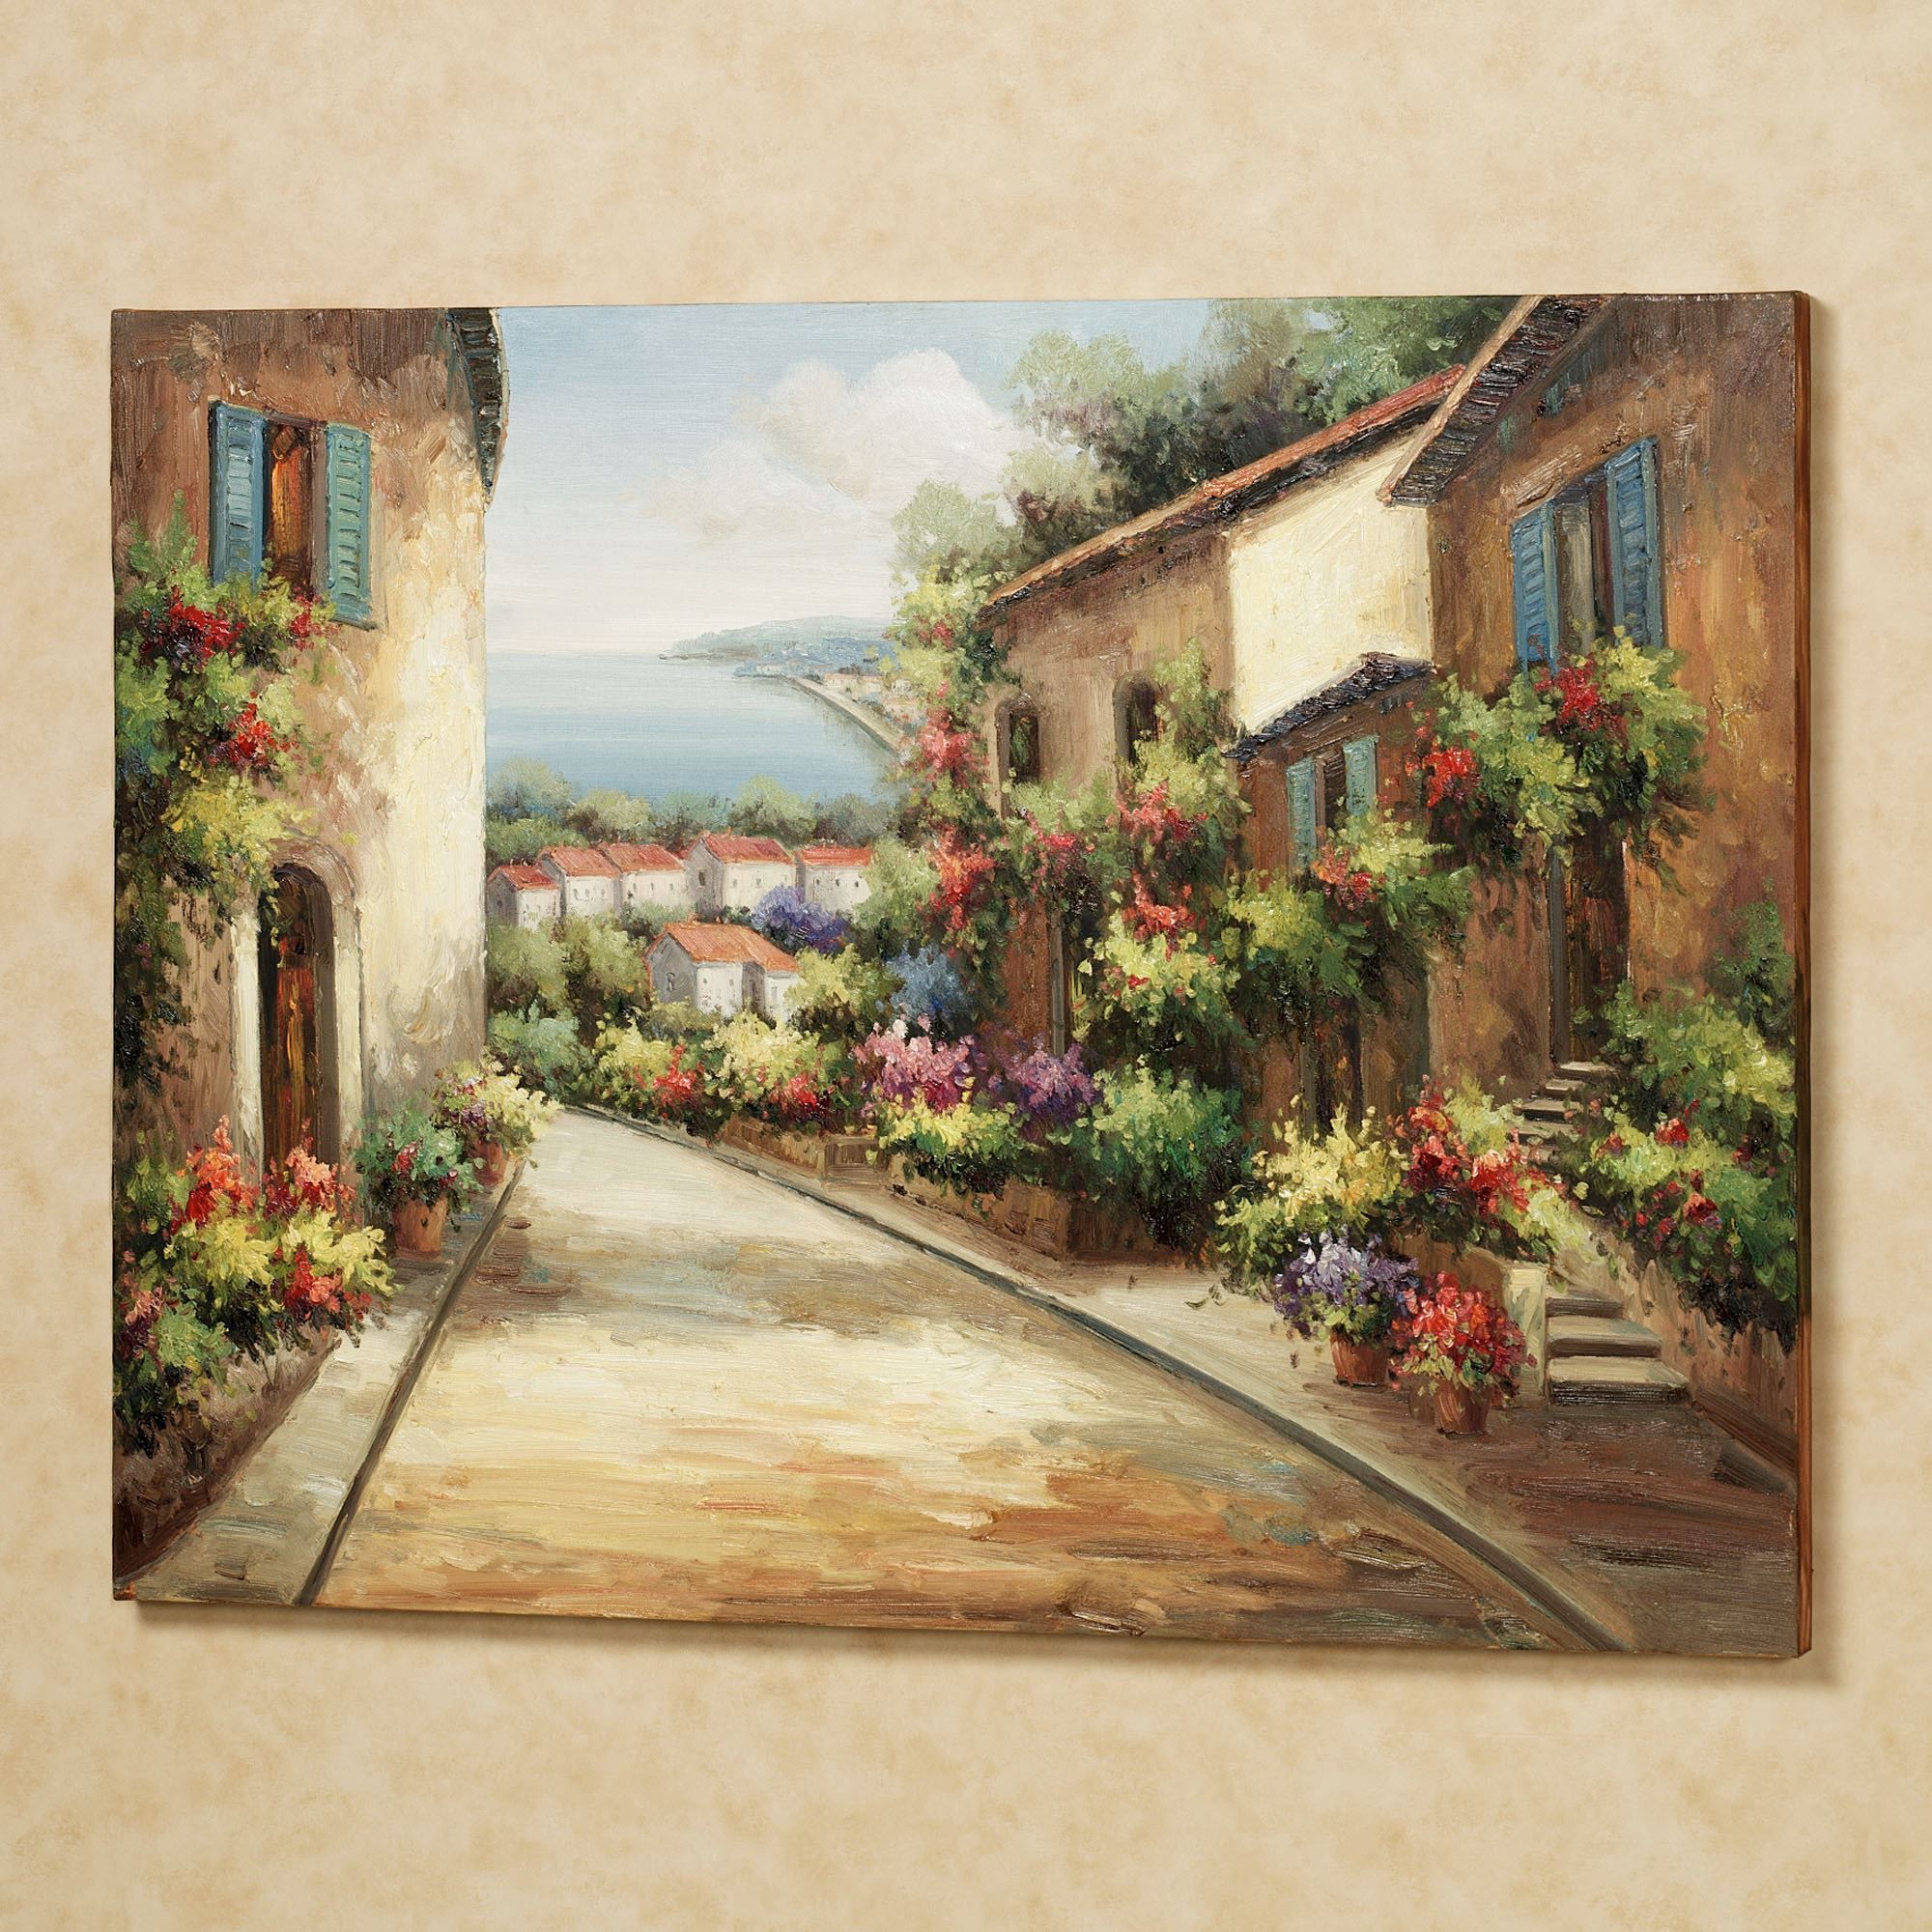 Streets Of Tuscany Canvas Wall Art Intended For Most Recent Italy Framed Art Prints (View 14 of 20)